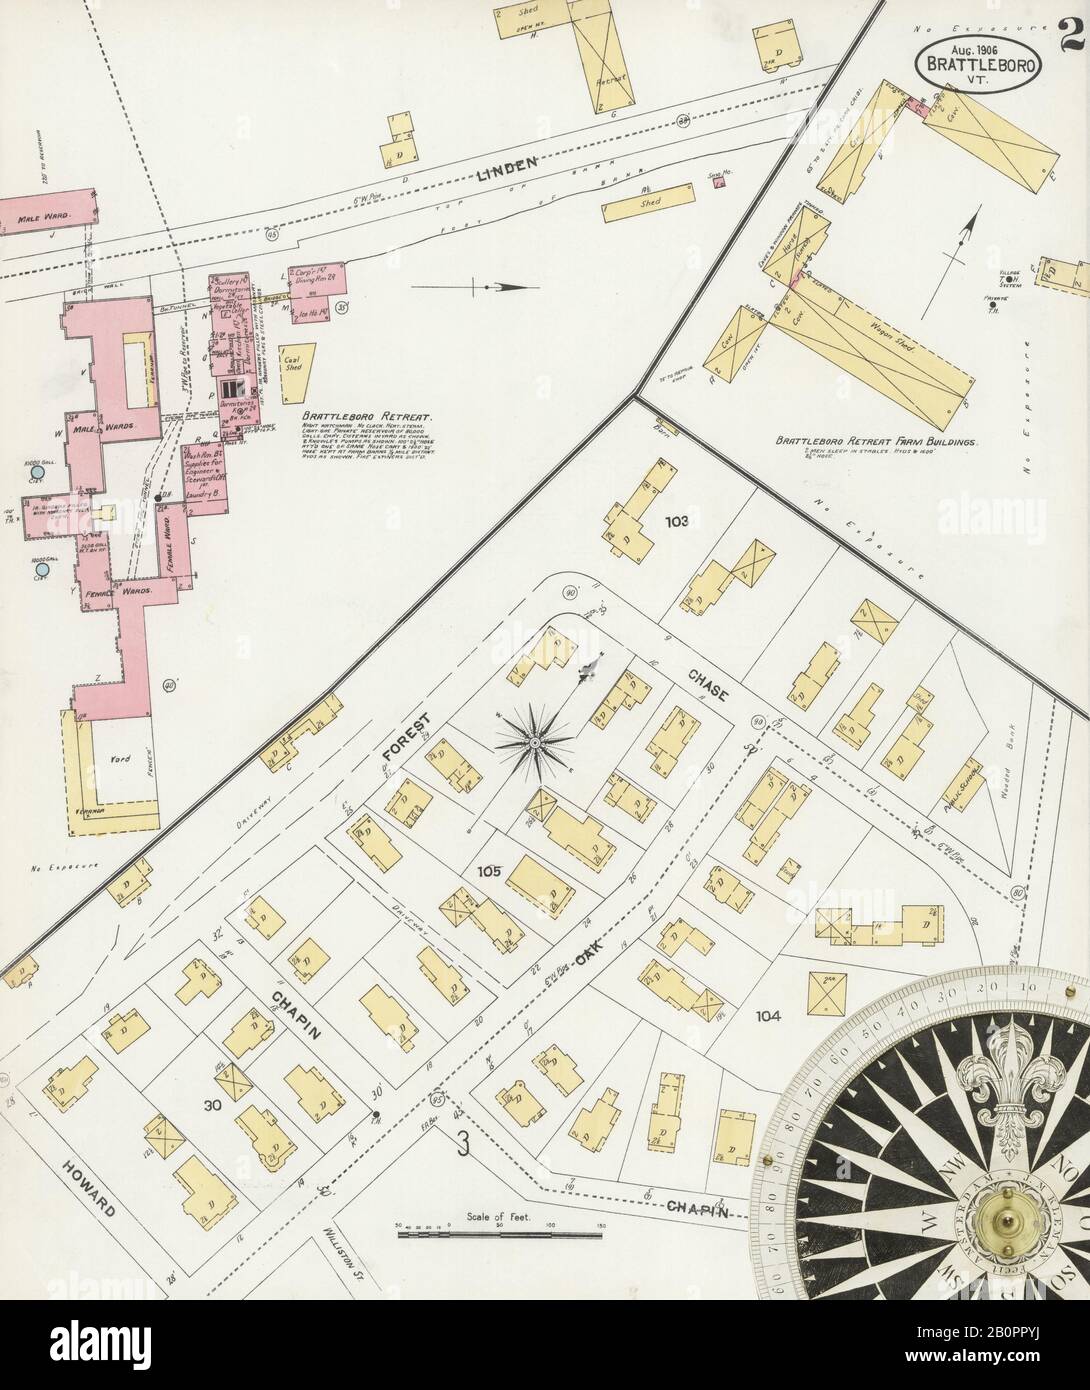 Image 2 of Sanborn Fire Insurance Map from Brattleboro, Windham County, Vermont. Aug 1906. 14 Sheet(s), America, street map with a Nineteenth Century compass Stock Photo